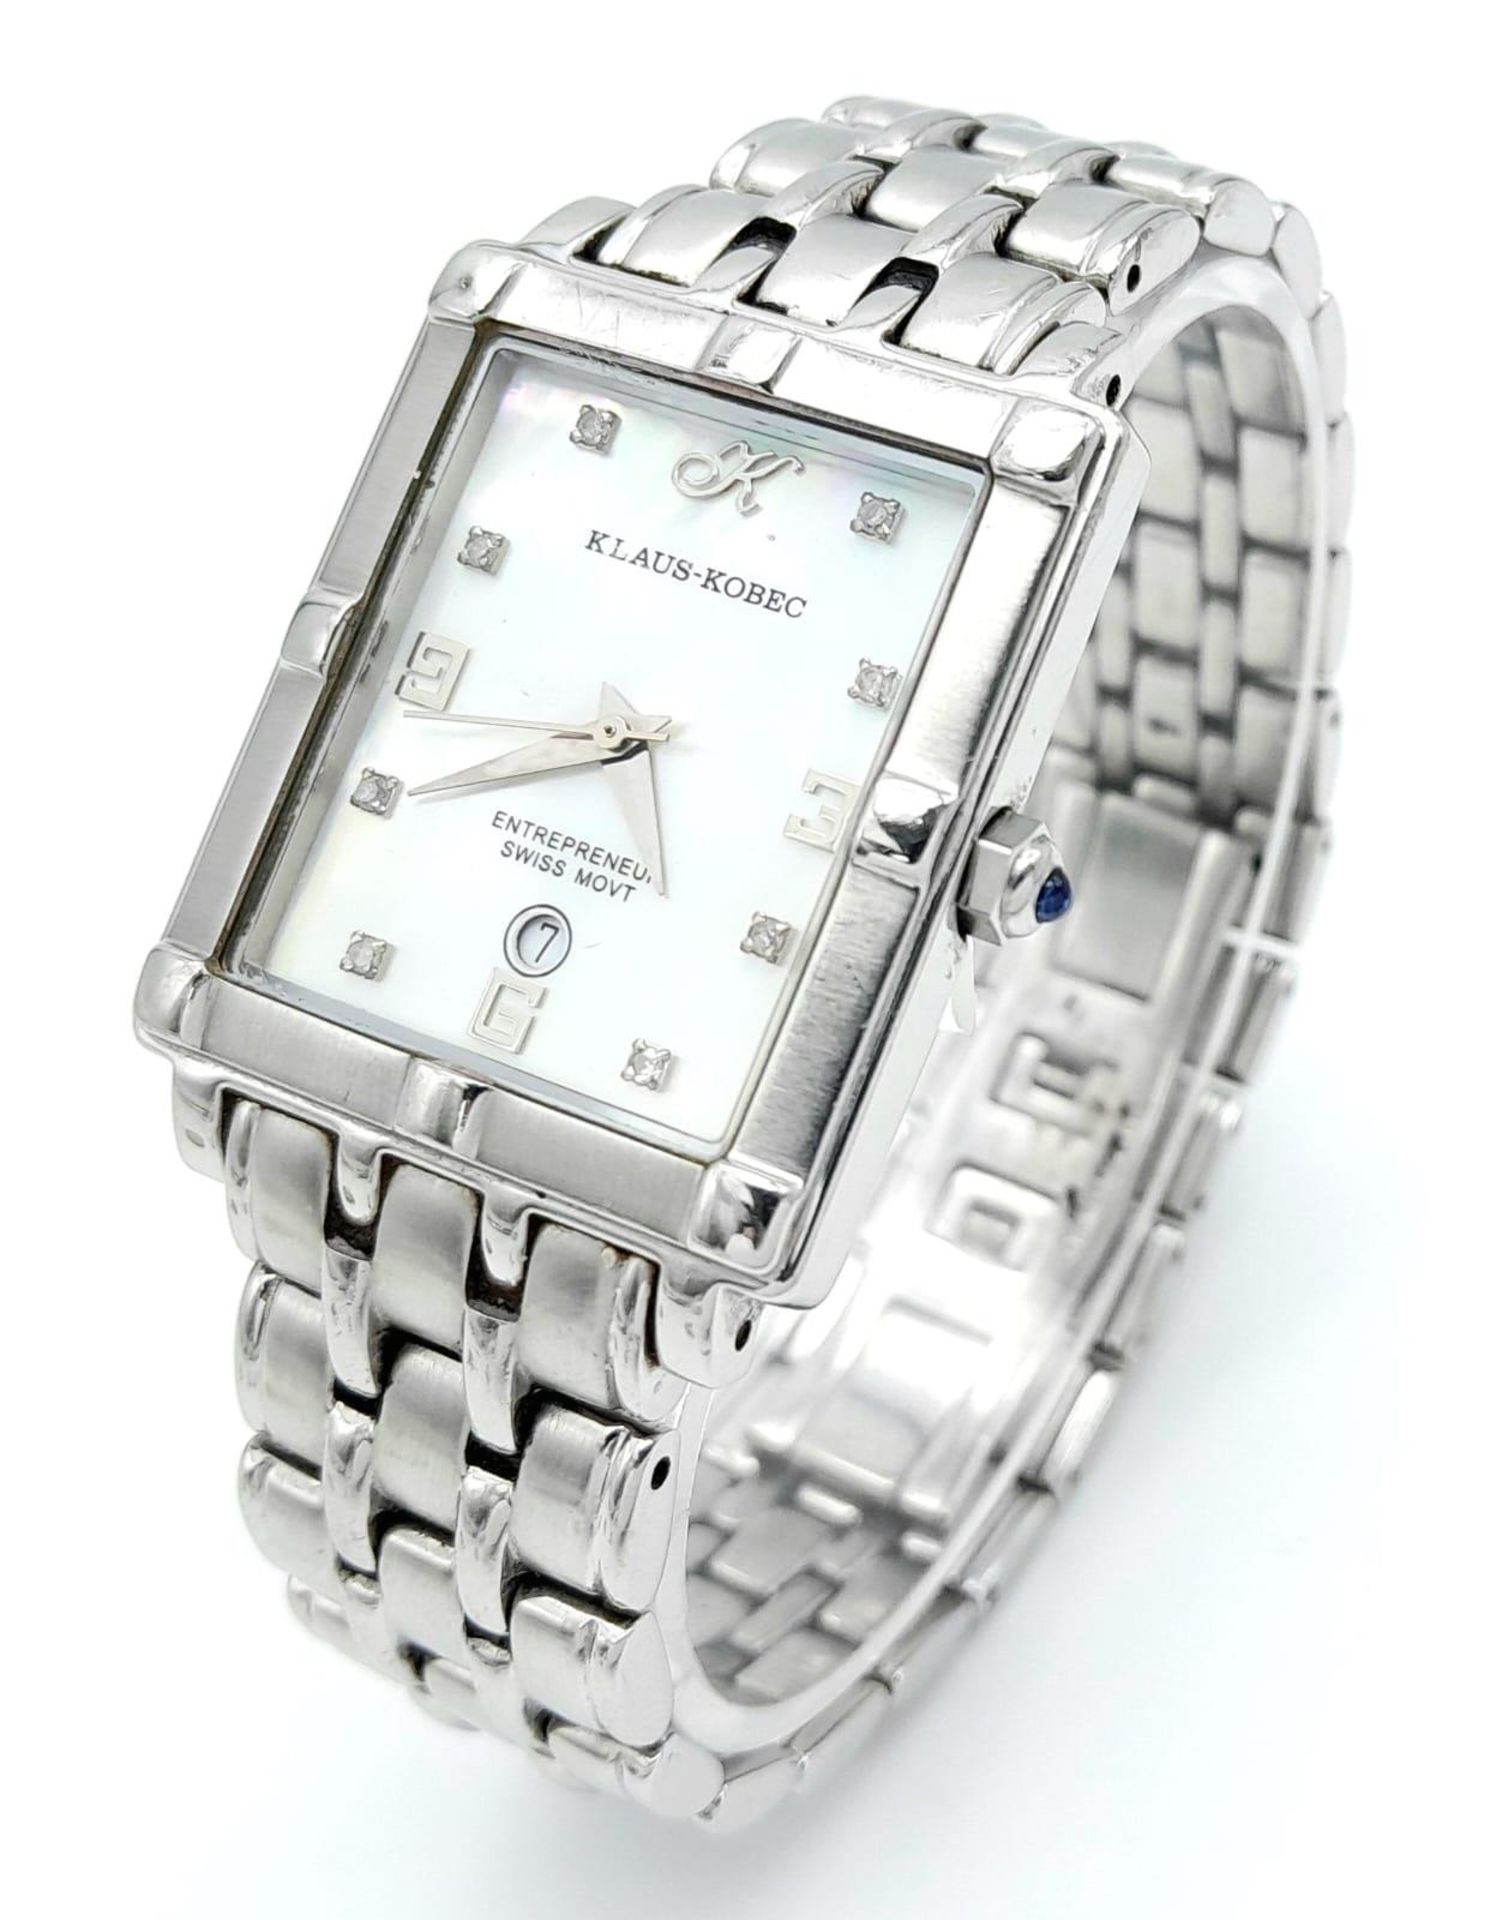 A Klaus Kobec Mother of Pearl Dial Quartz Ladies Watch. Stainless steel bracelet and case - 28mm. In